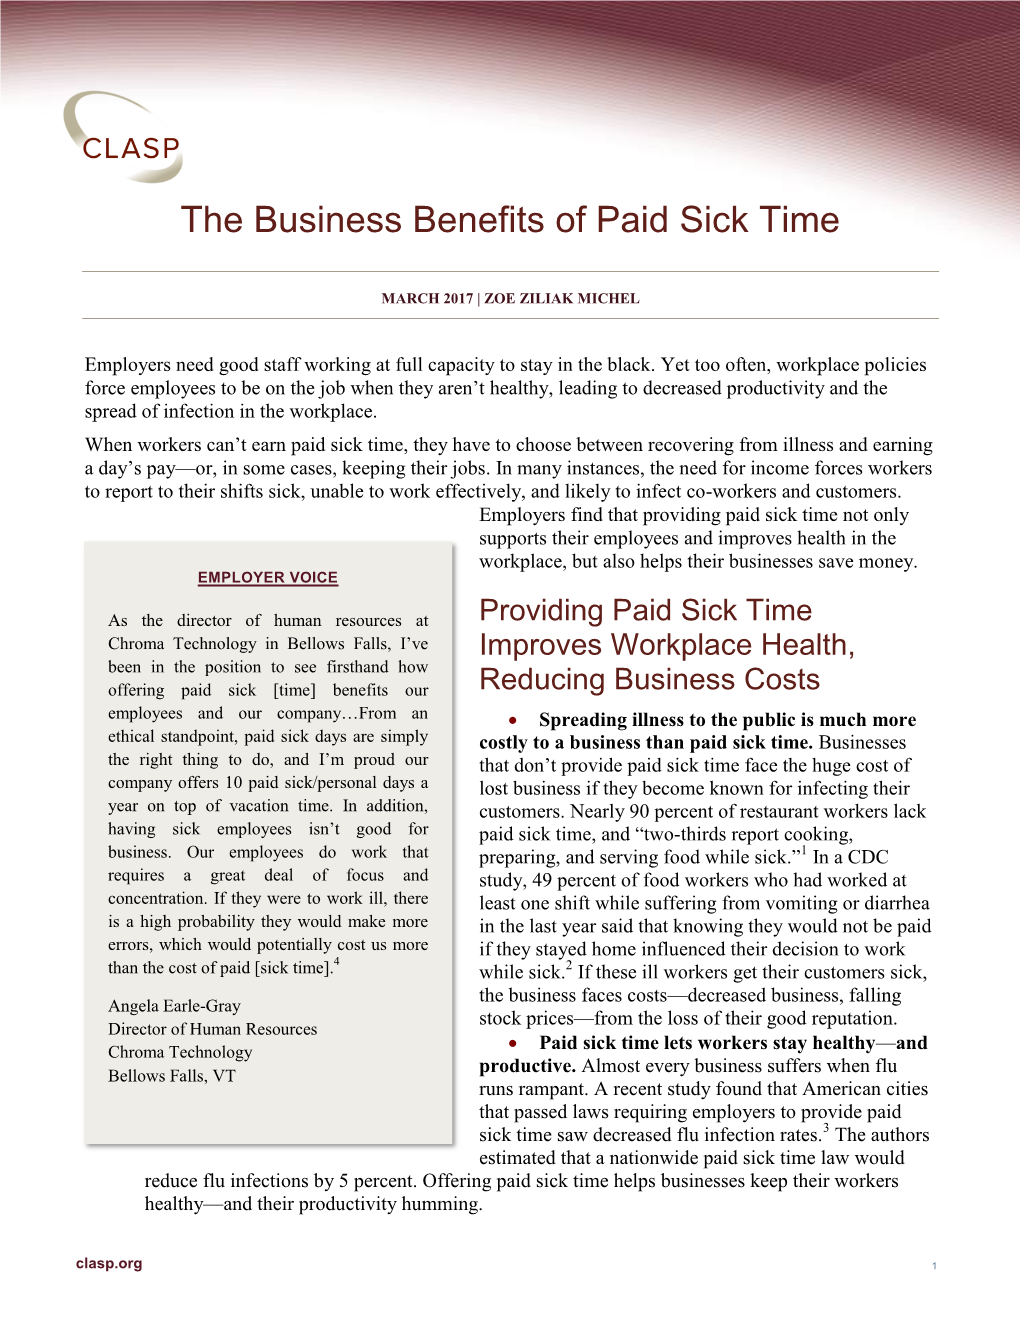 The Business Benefits of Paid Sick Time